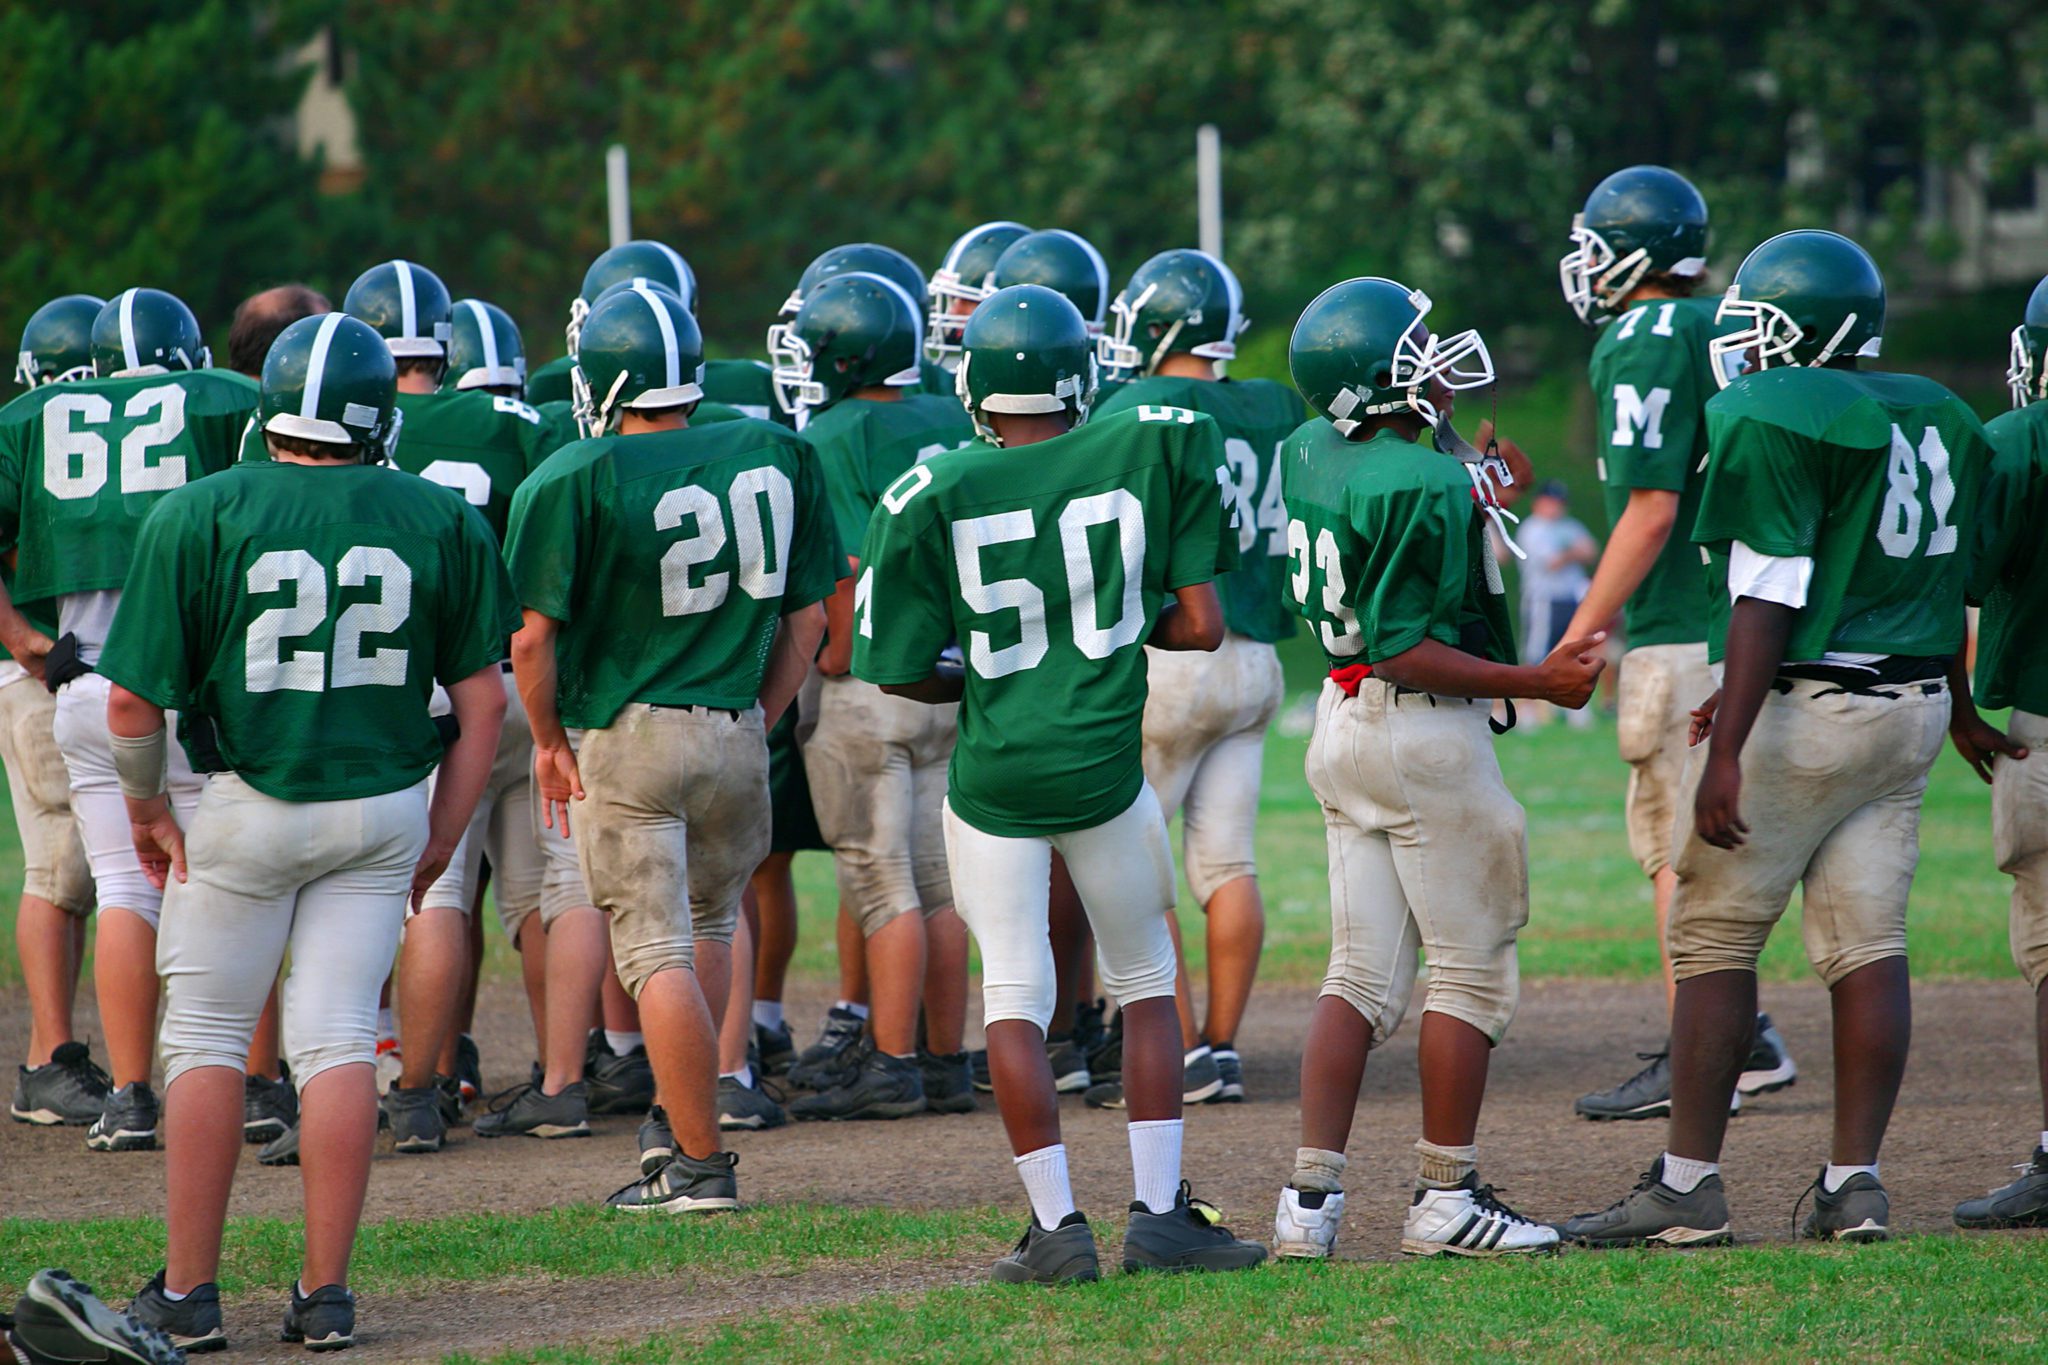 Teenagers on a football team wait for their turn on the field